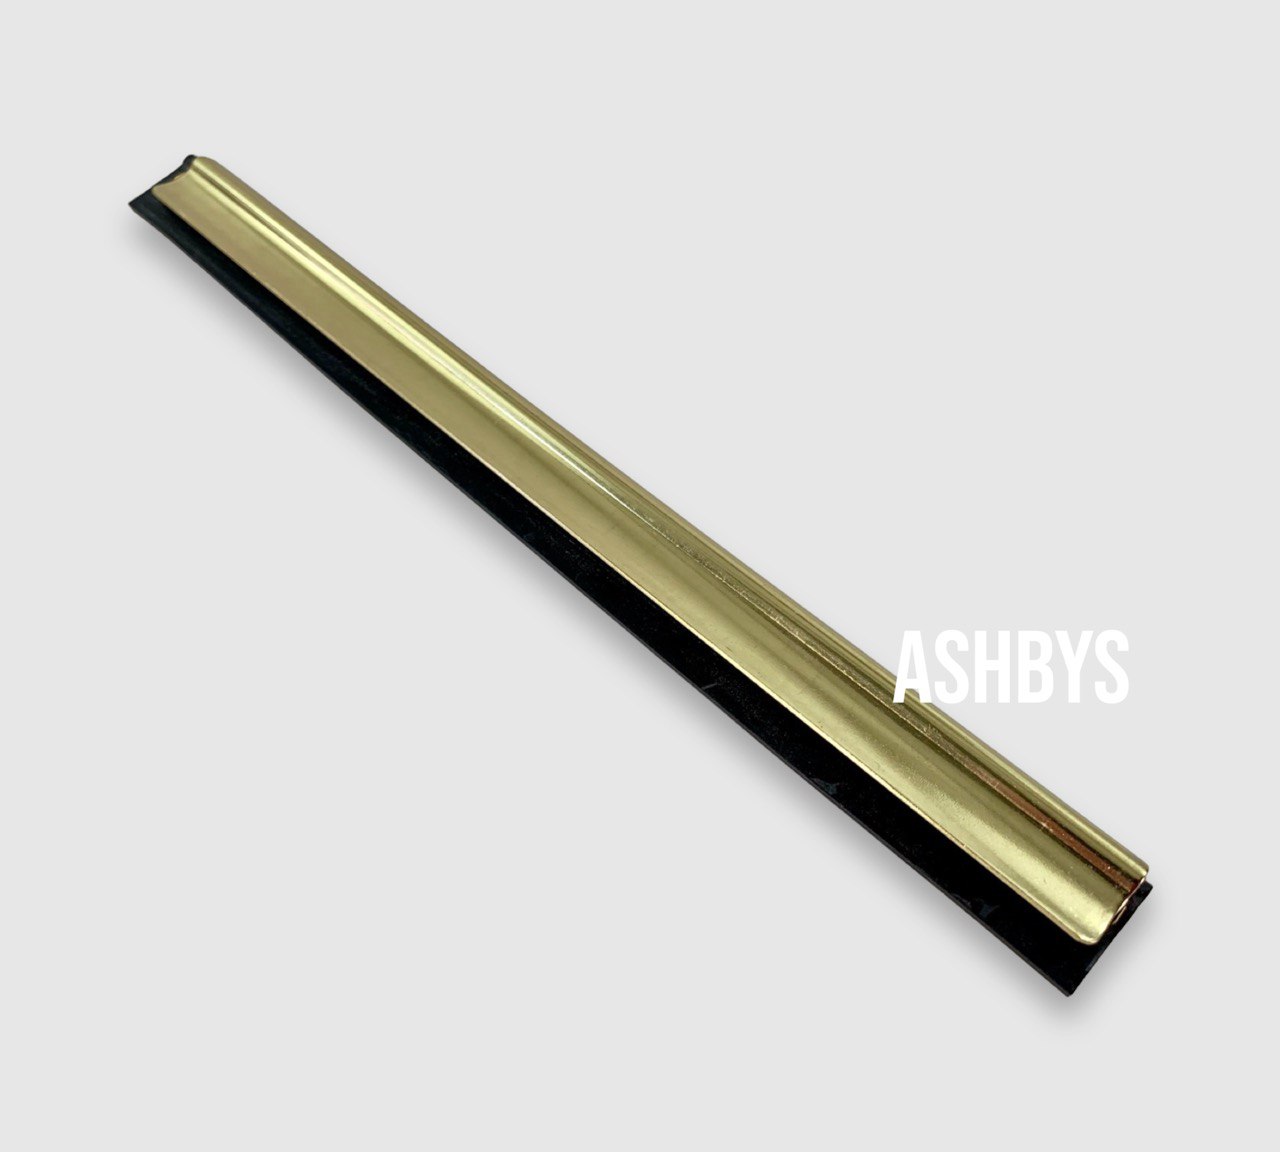 Brass Squeegee Channel (25 cm / 10” inch) - for Window Cleaning